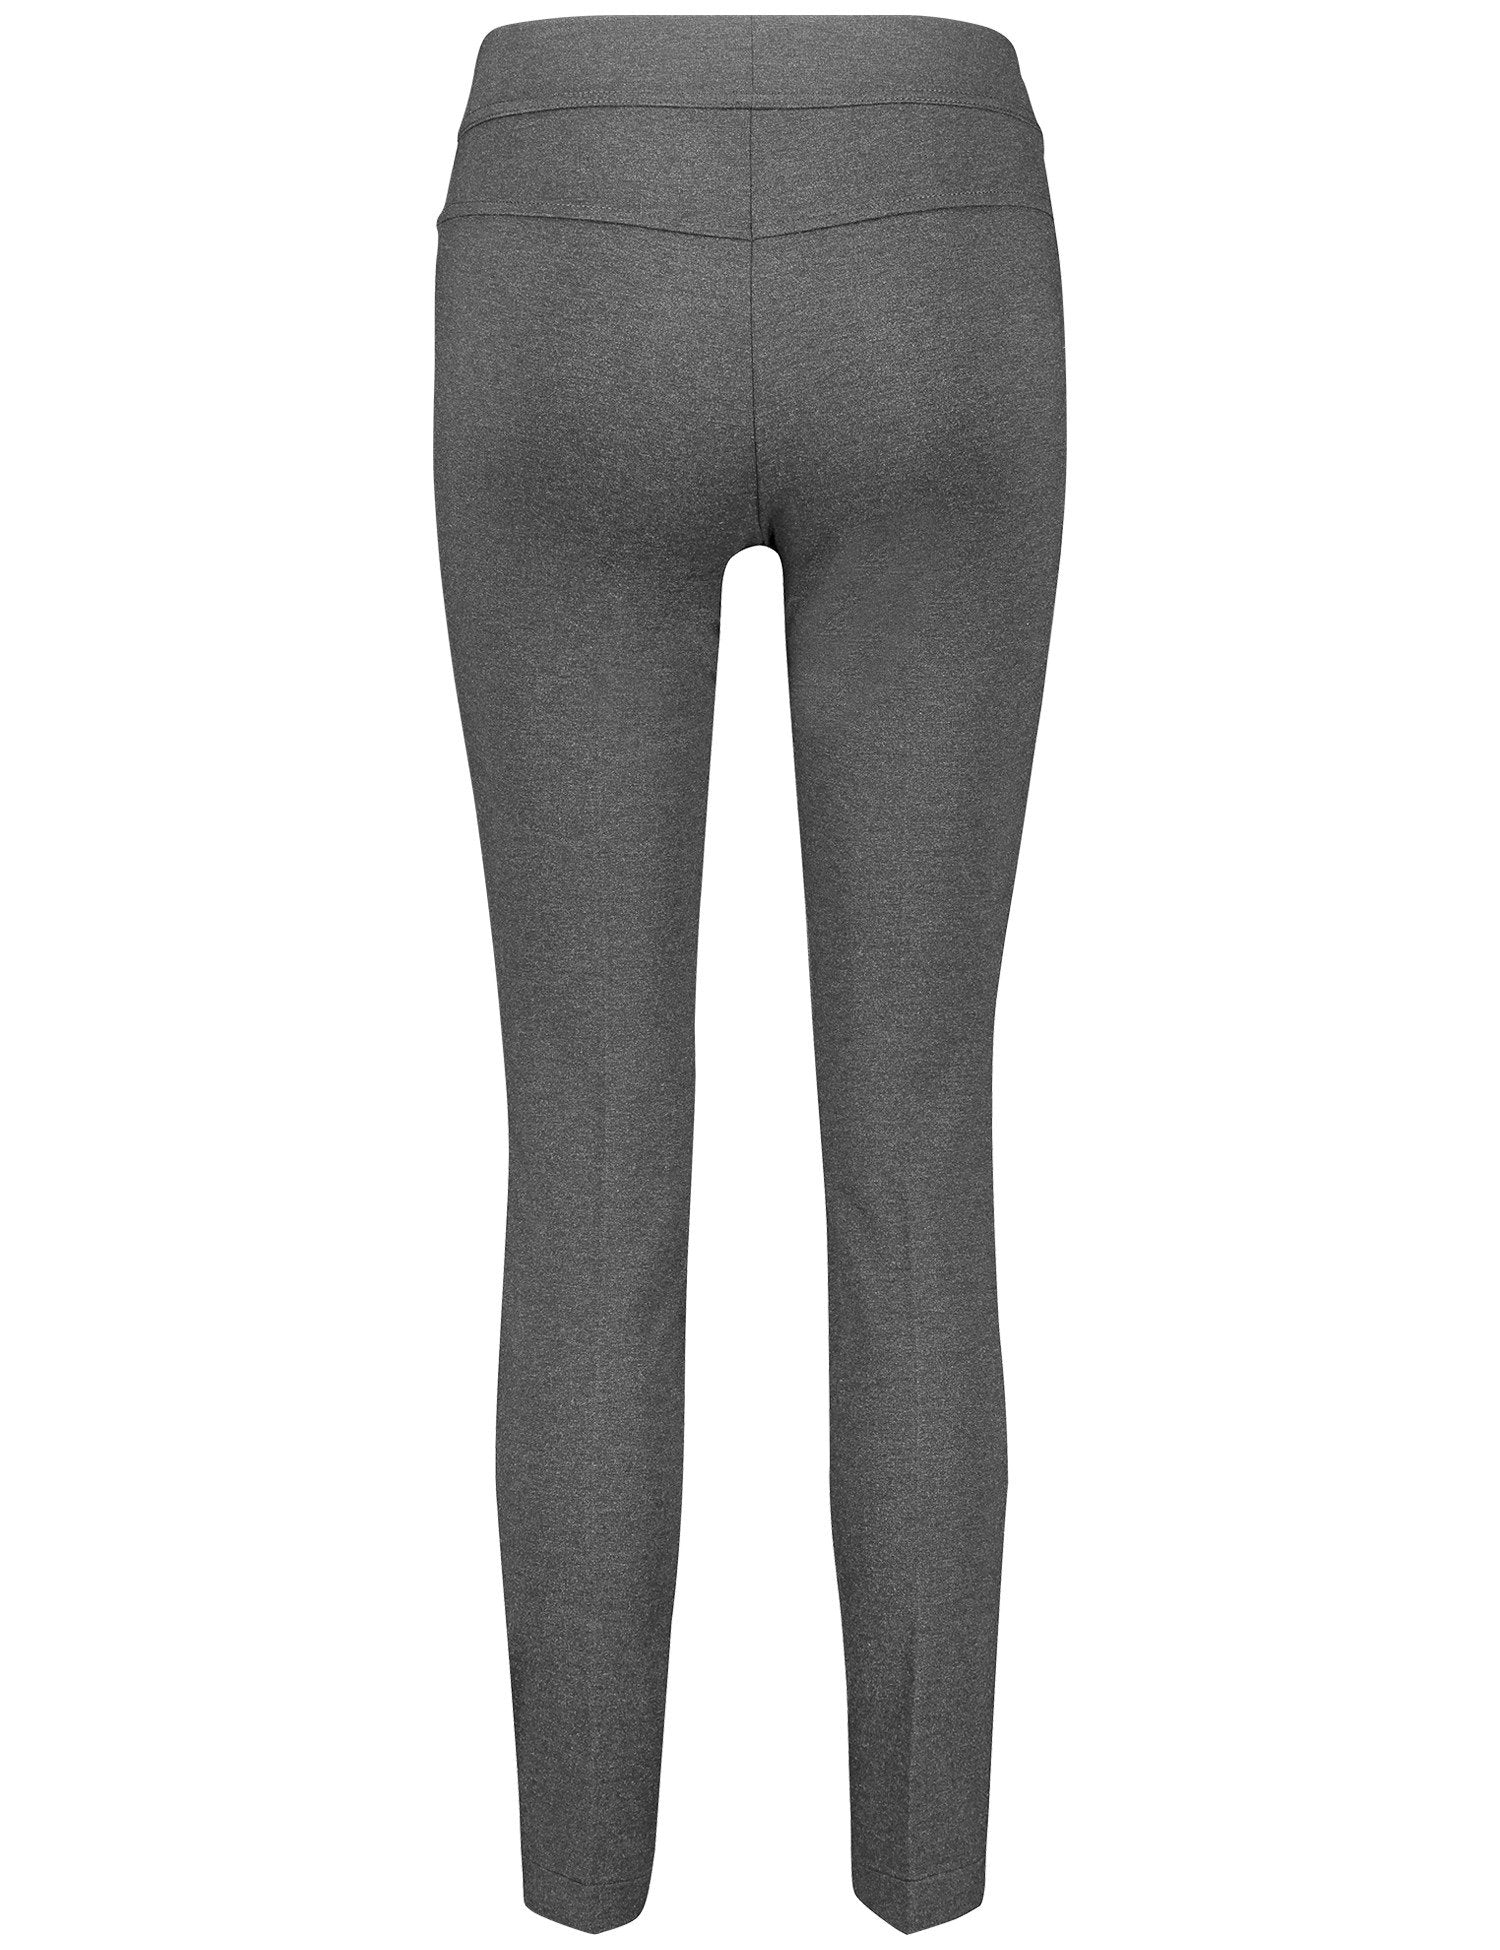 Grey Leggings With Side Zippers_122028-66275_202690_02